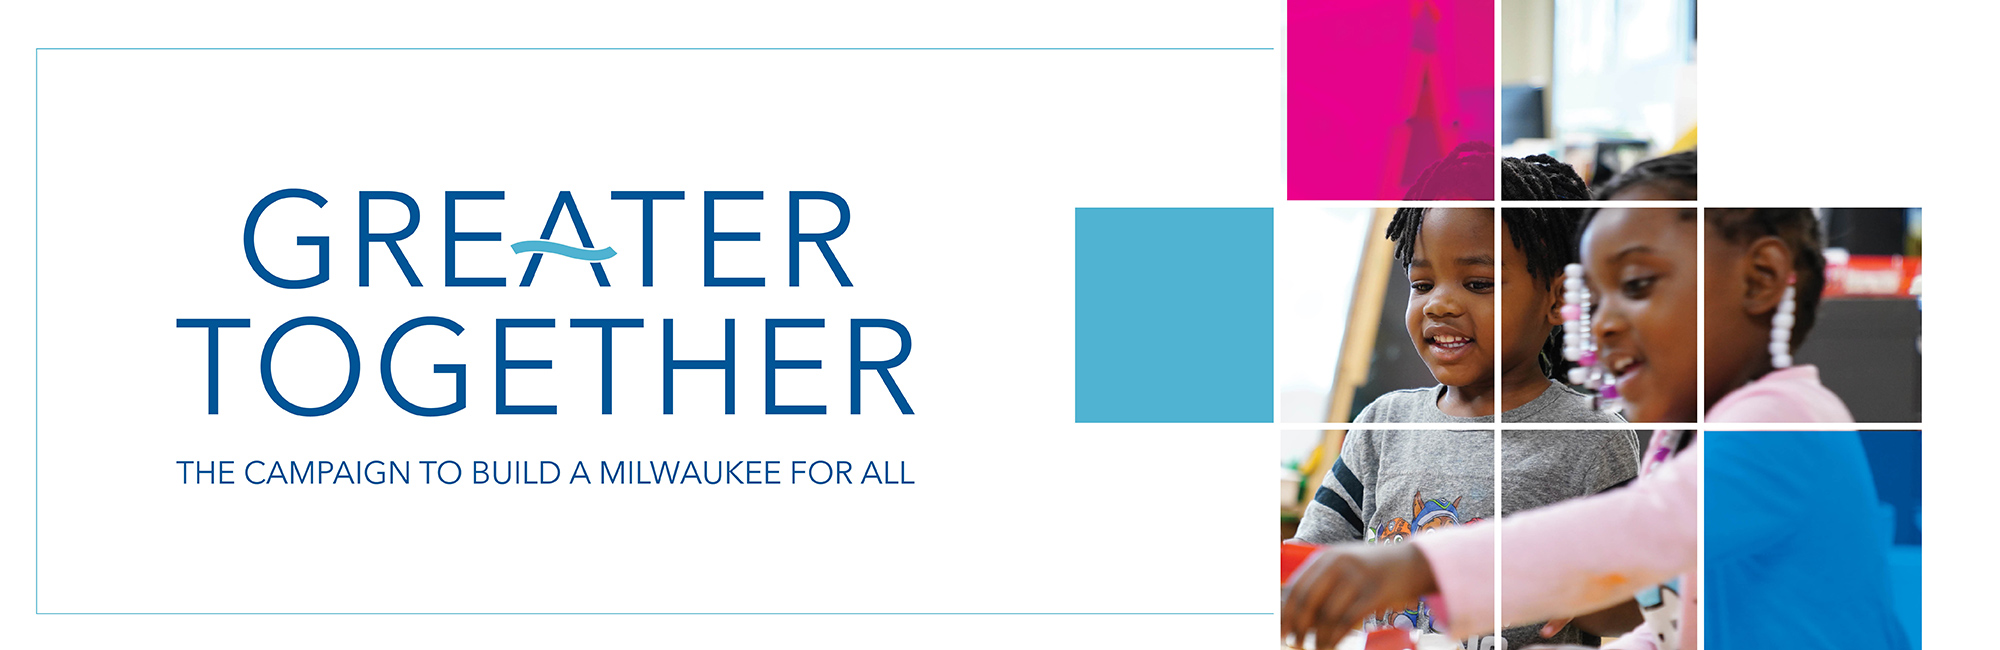 Greater Together Campaign banner featuring Early Childhood Care and Education